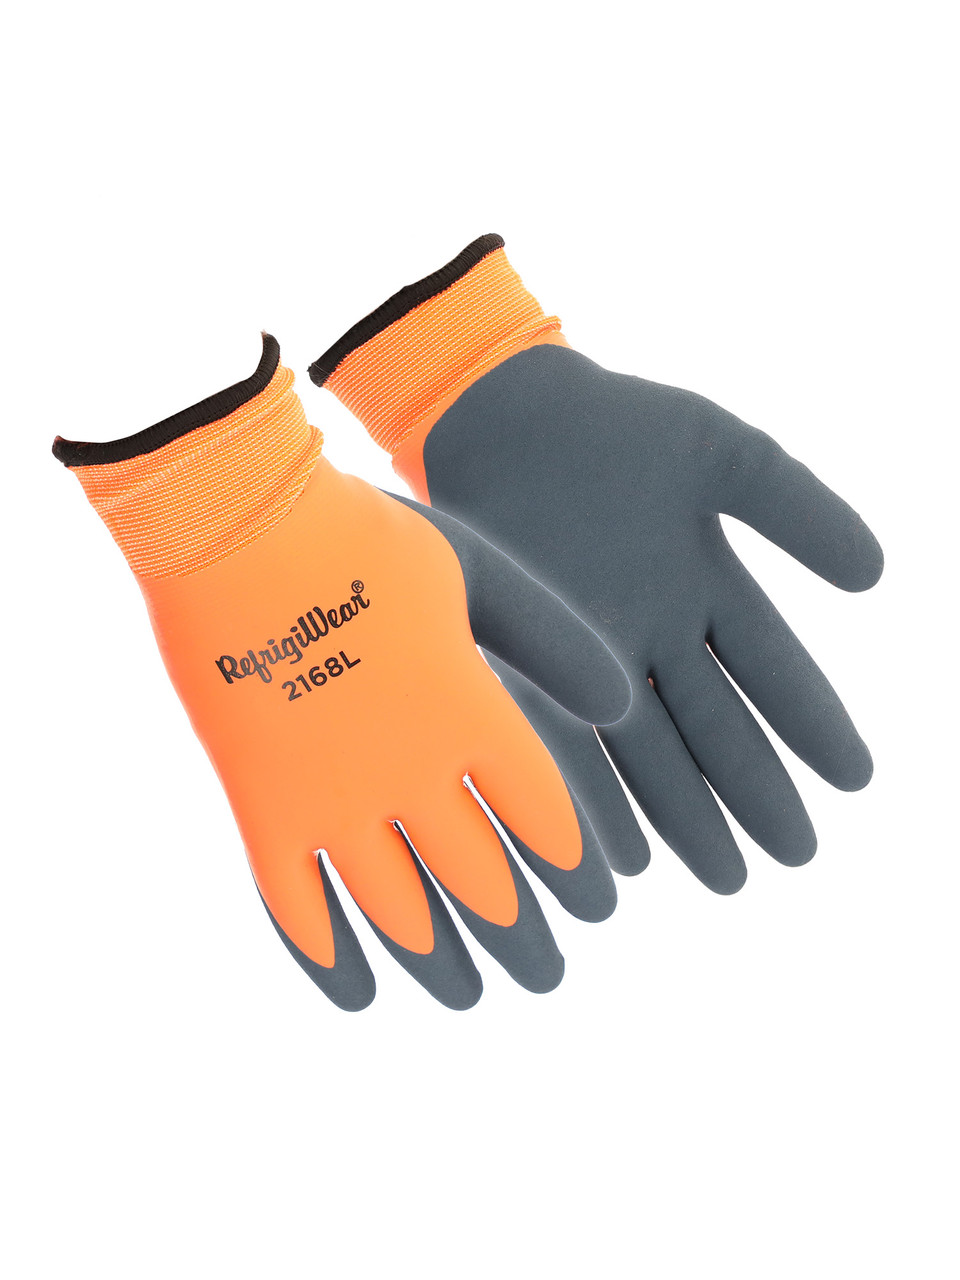 Which Safety Glove Coating/Dip Is Best?